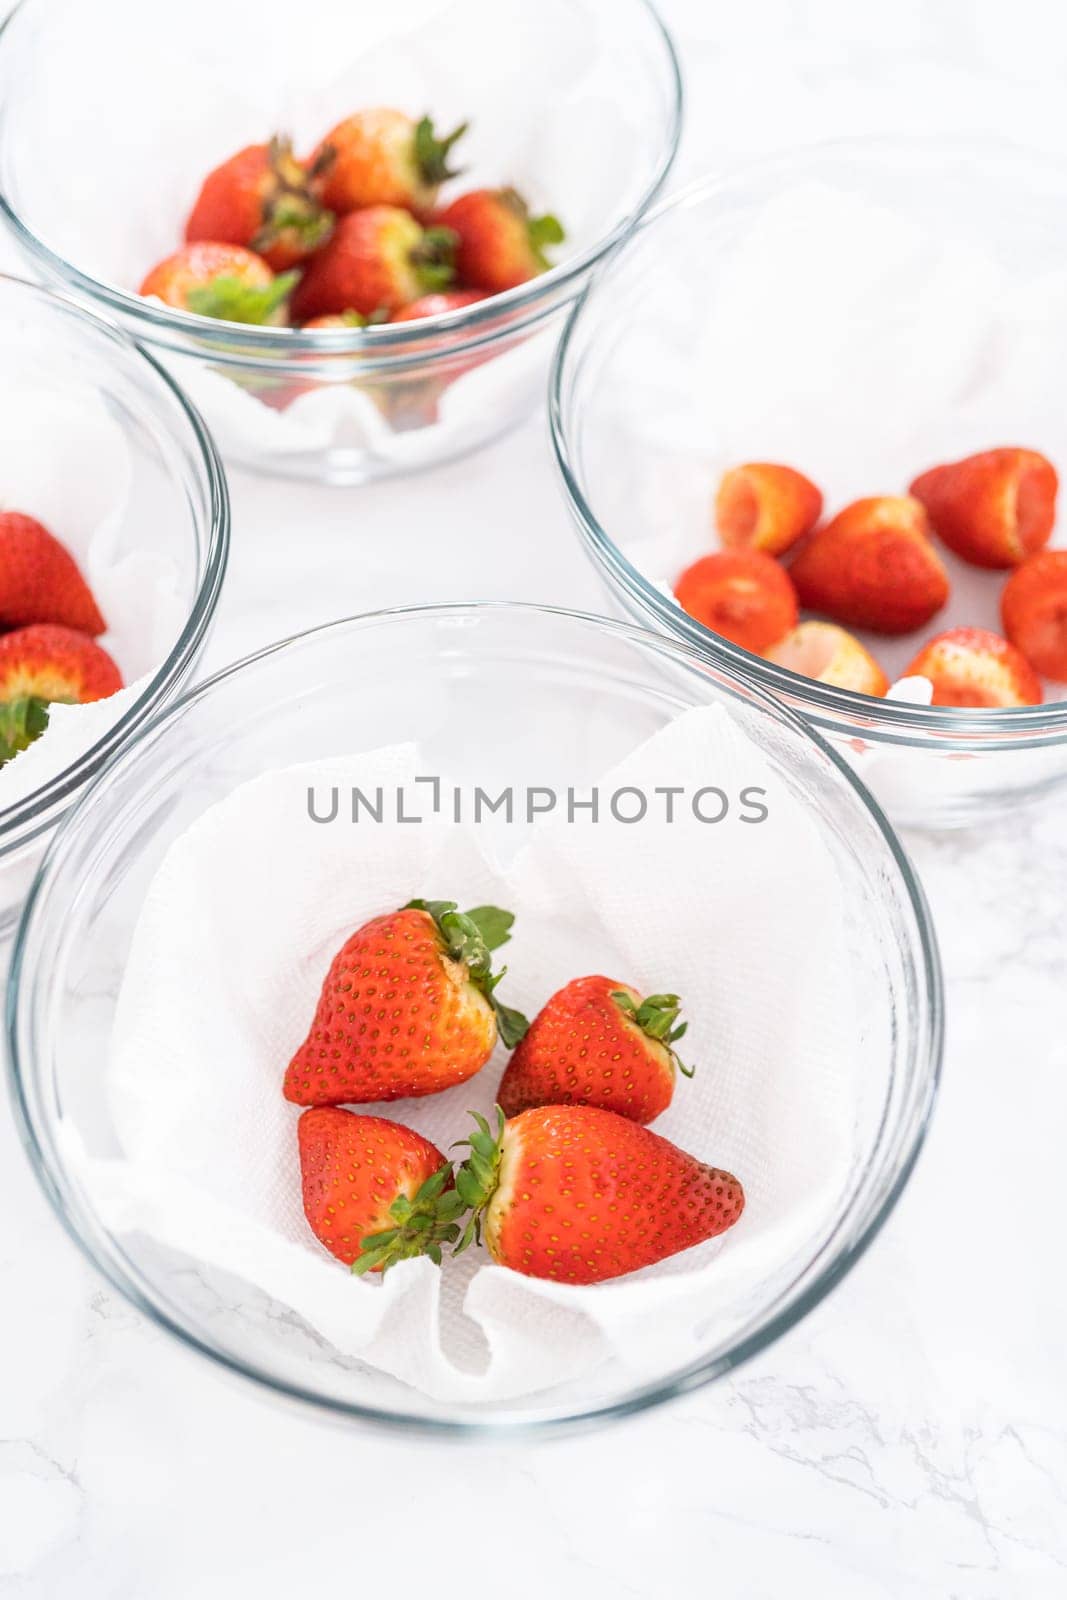 Bright red strawberries, interspersed with signs of mold, rest in a glass bowl lined with a paper towel on a white napkin, indicating improper storage techniques.